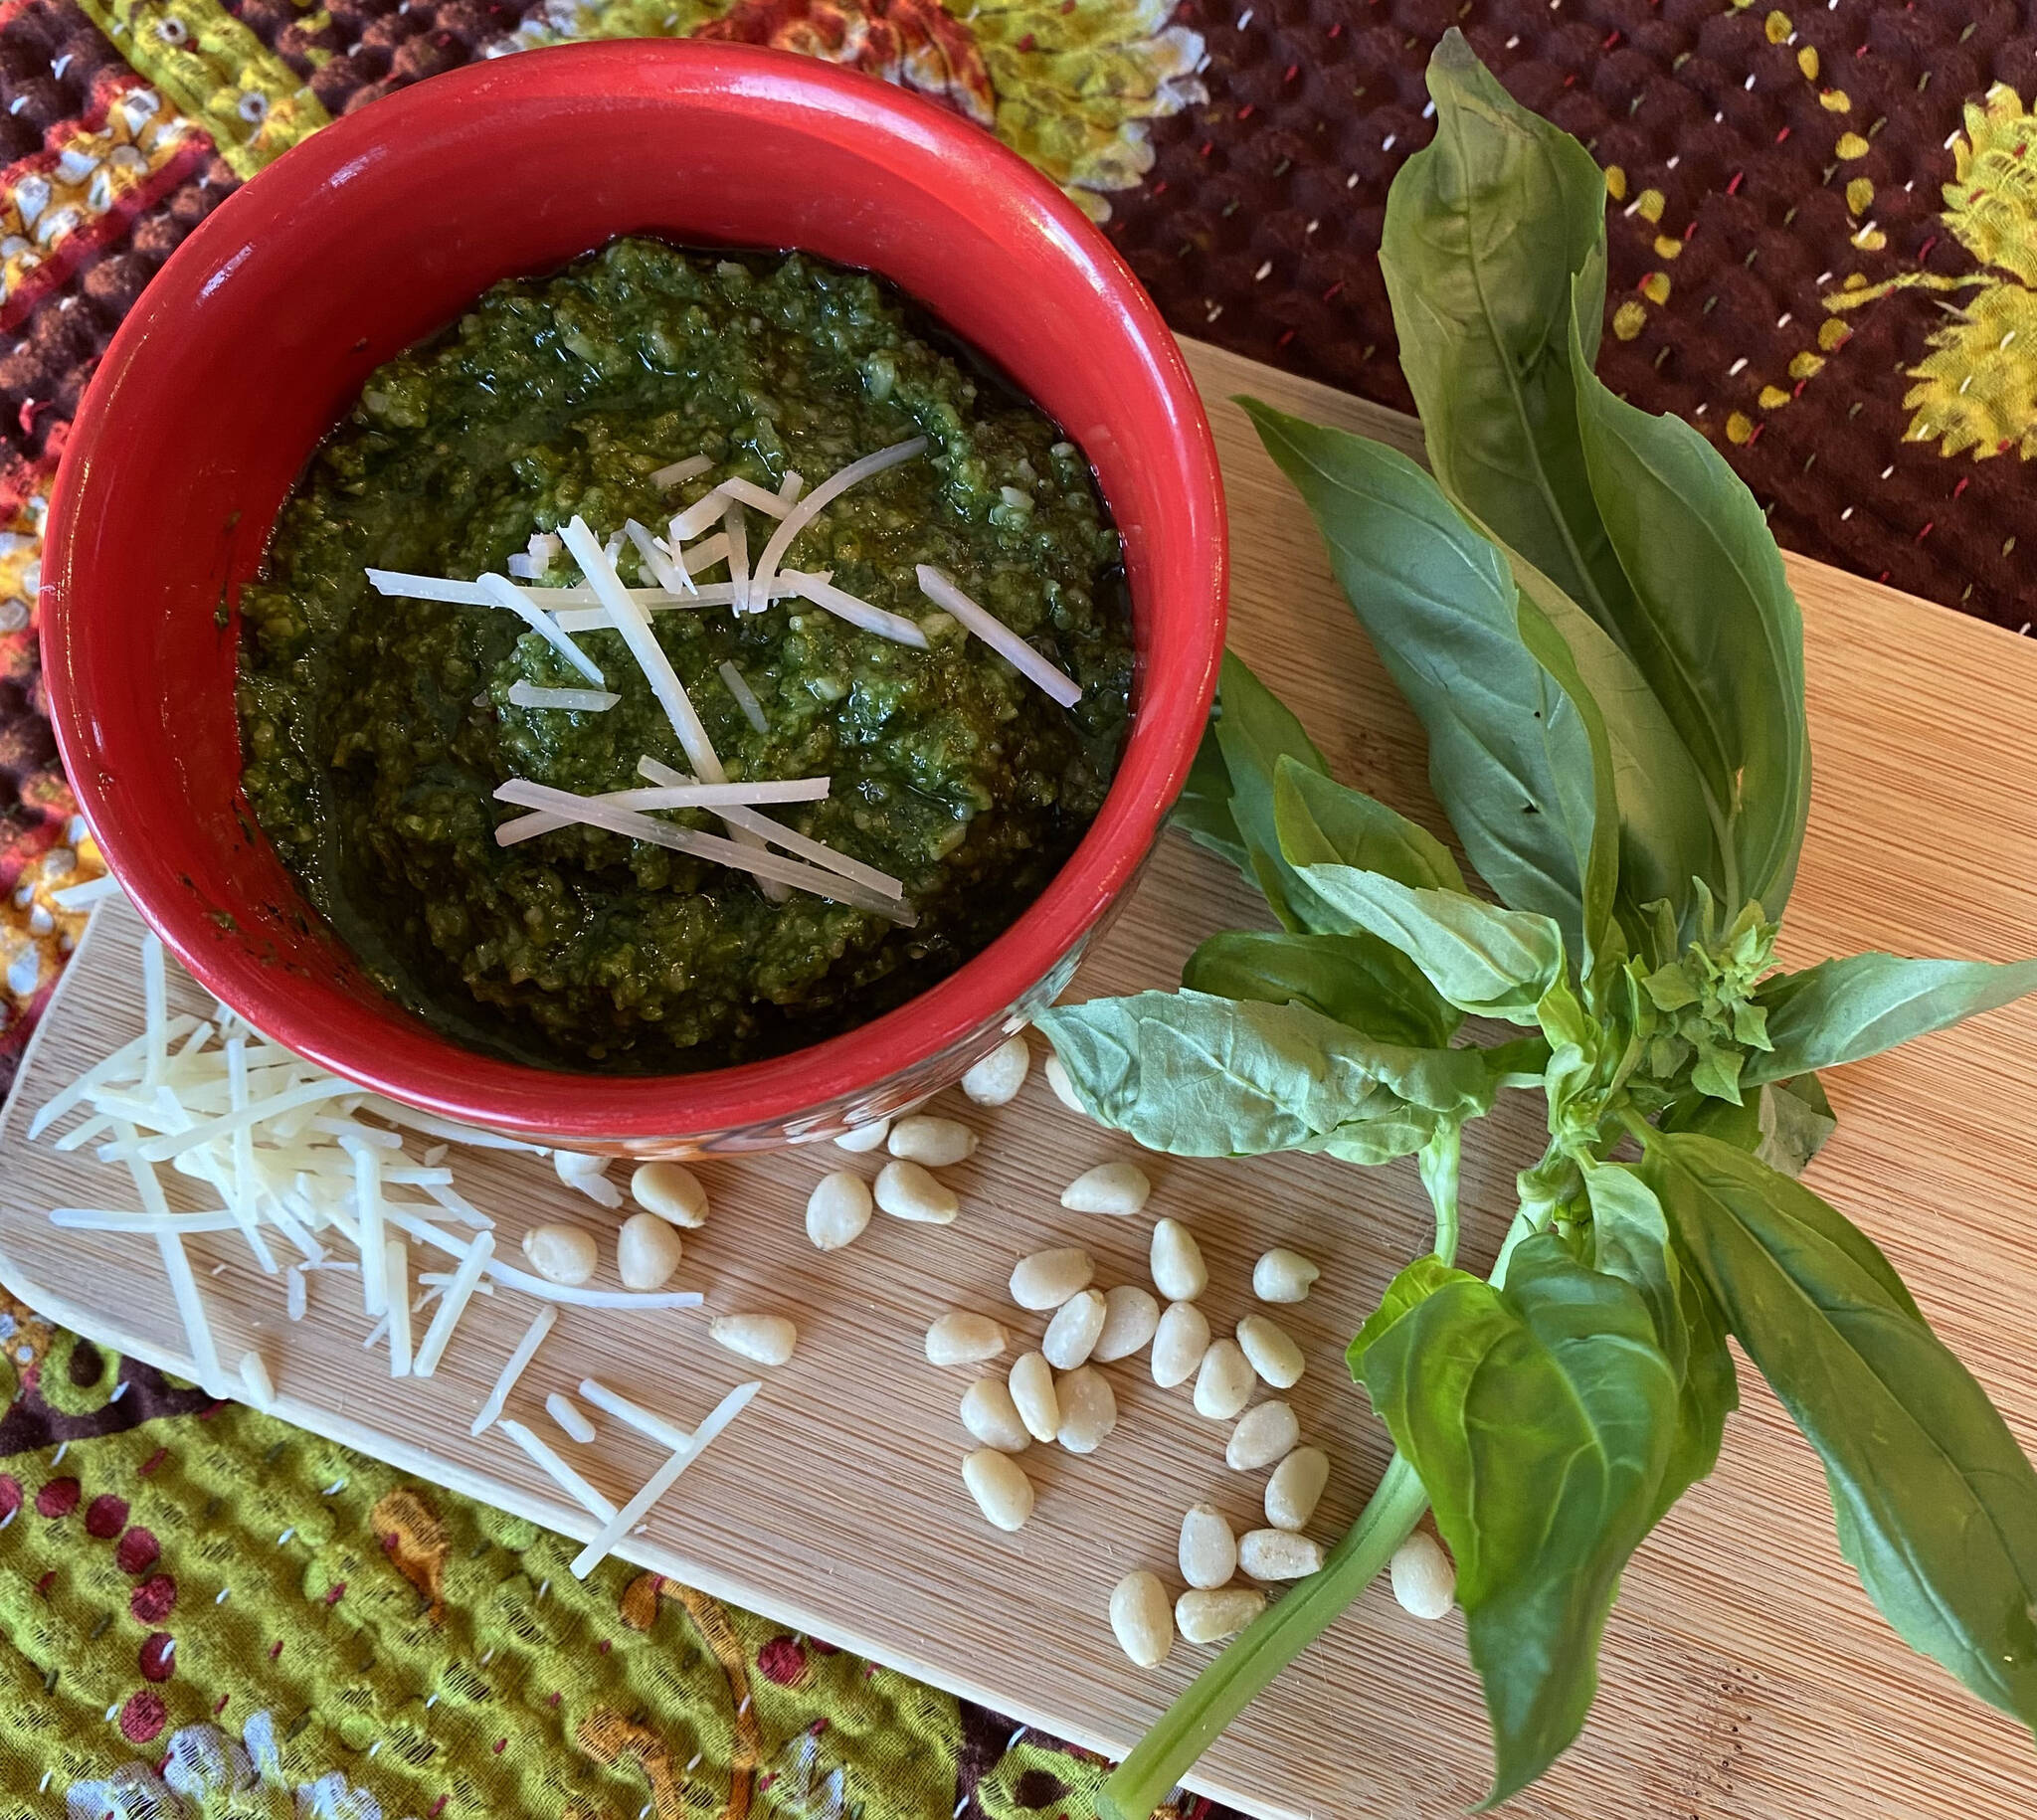 Basil, Parmesan, pine nuts and olive oil come together to make a fragrant pesto. (Photo by Tressa Dale/Peninsula Clarion)